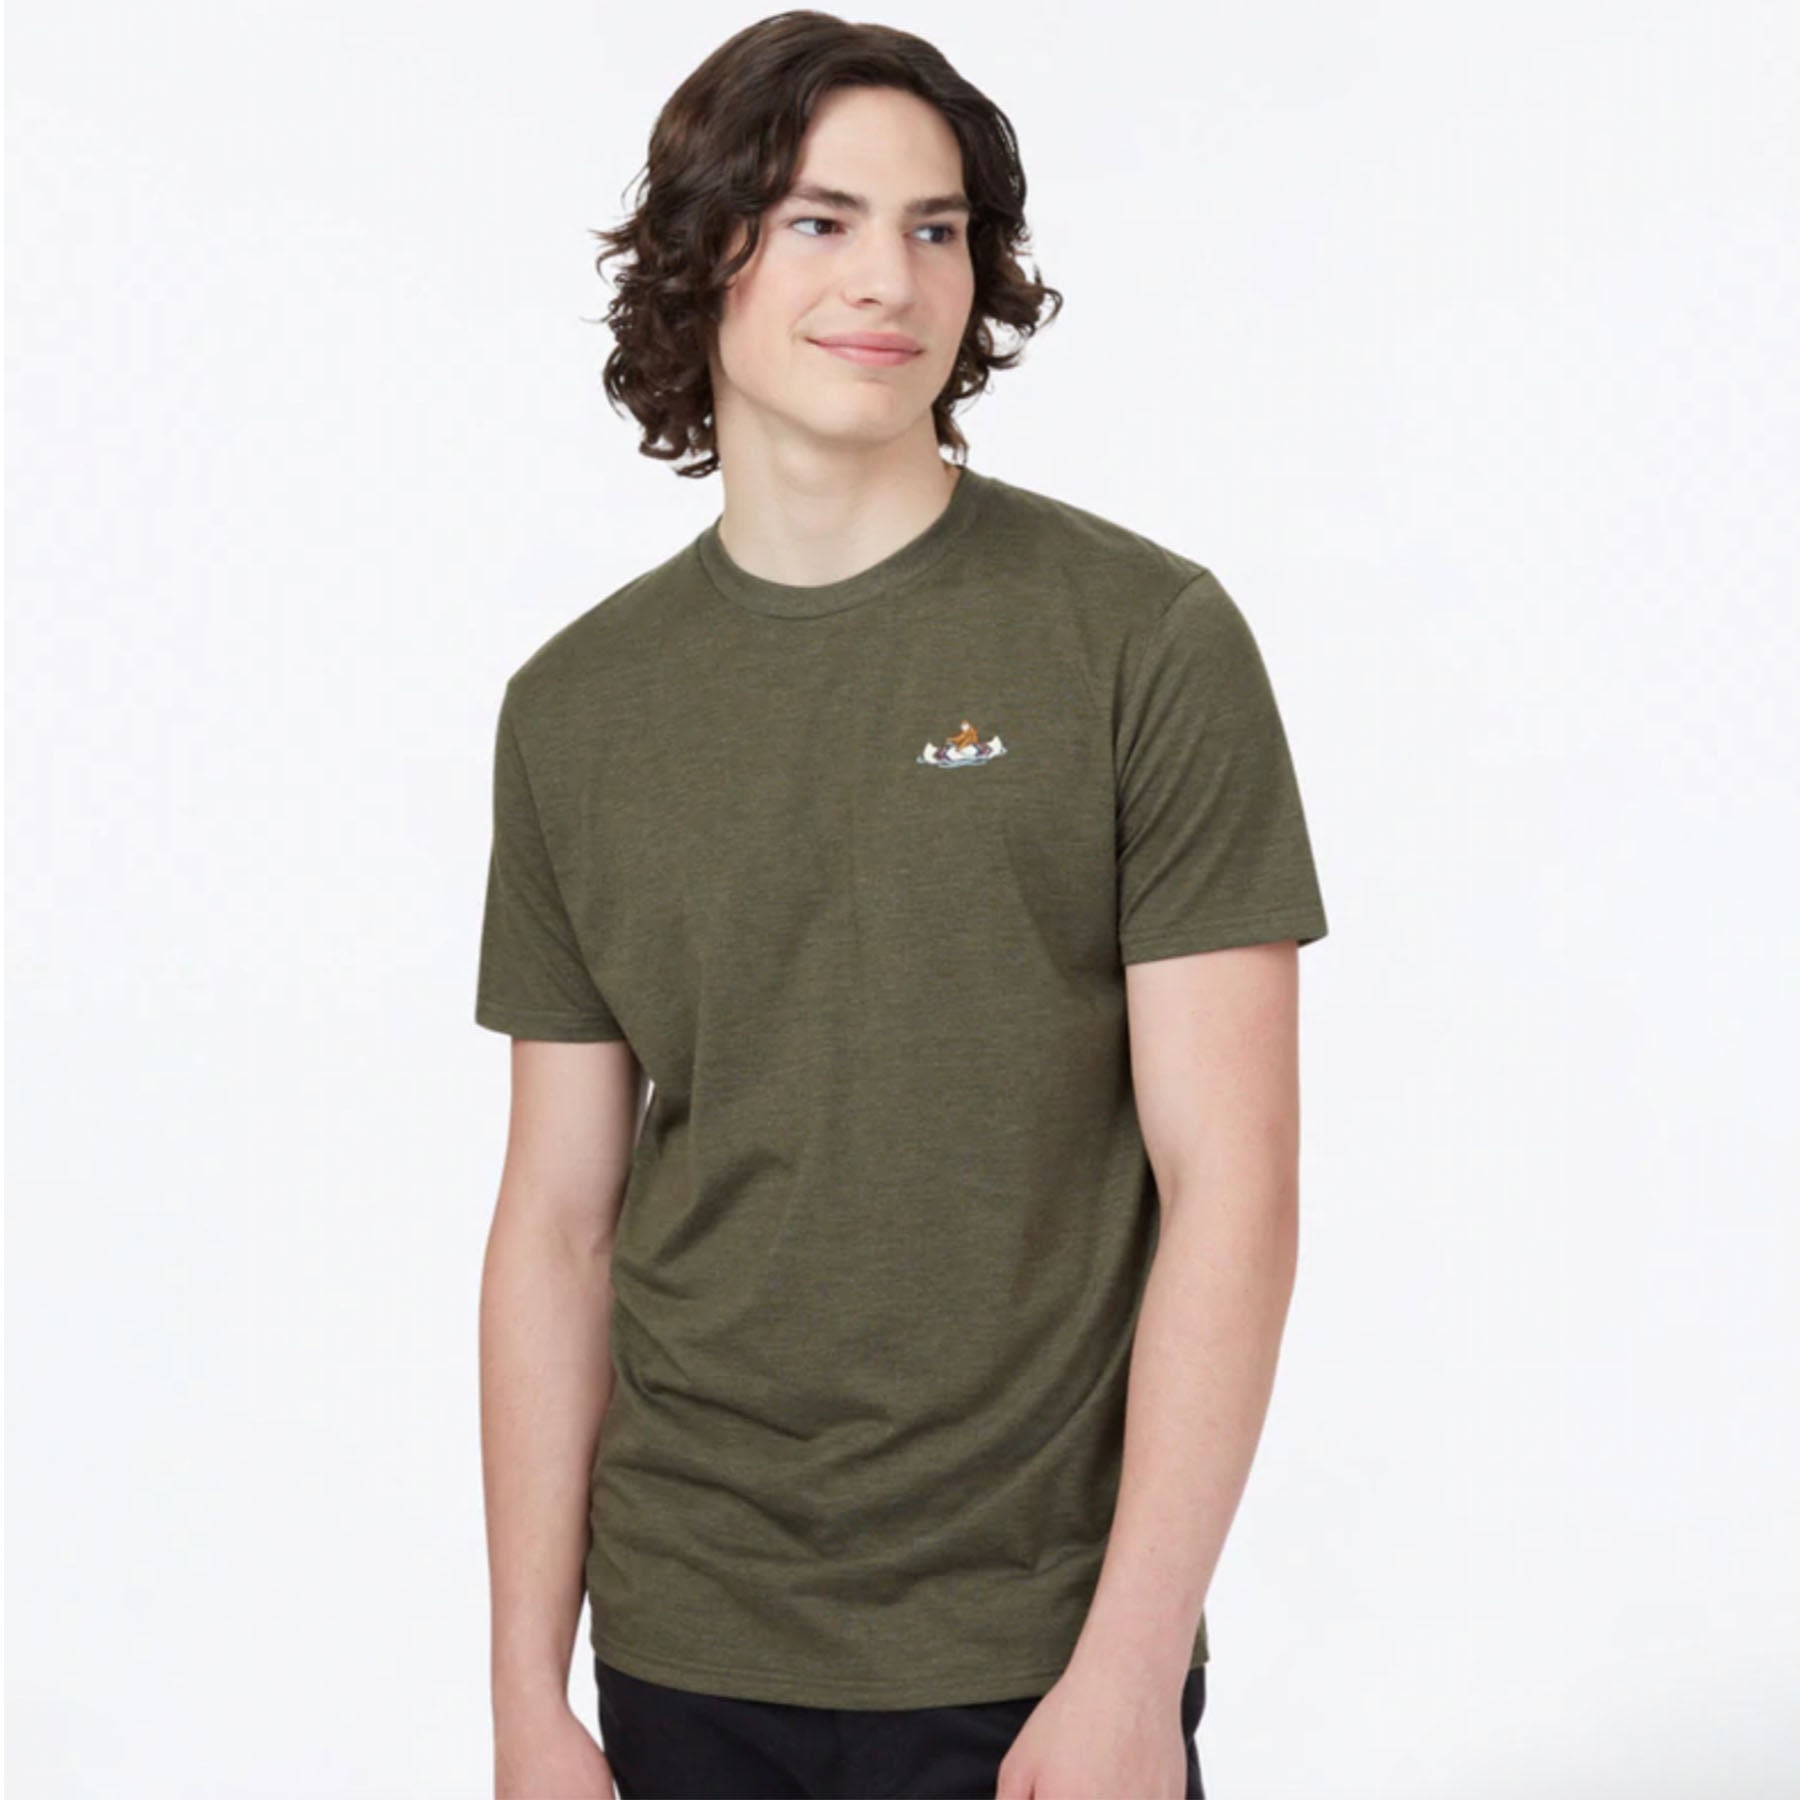 Hero image of the front of the Men's Sasquatch tee in olive green